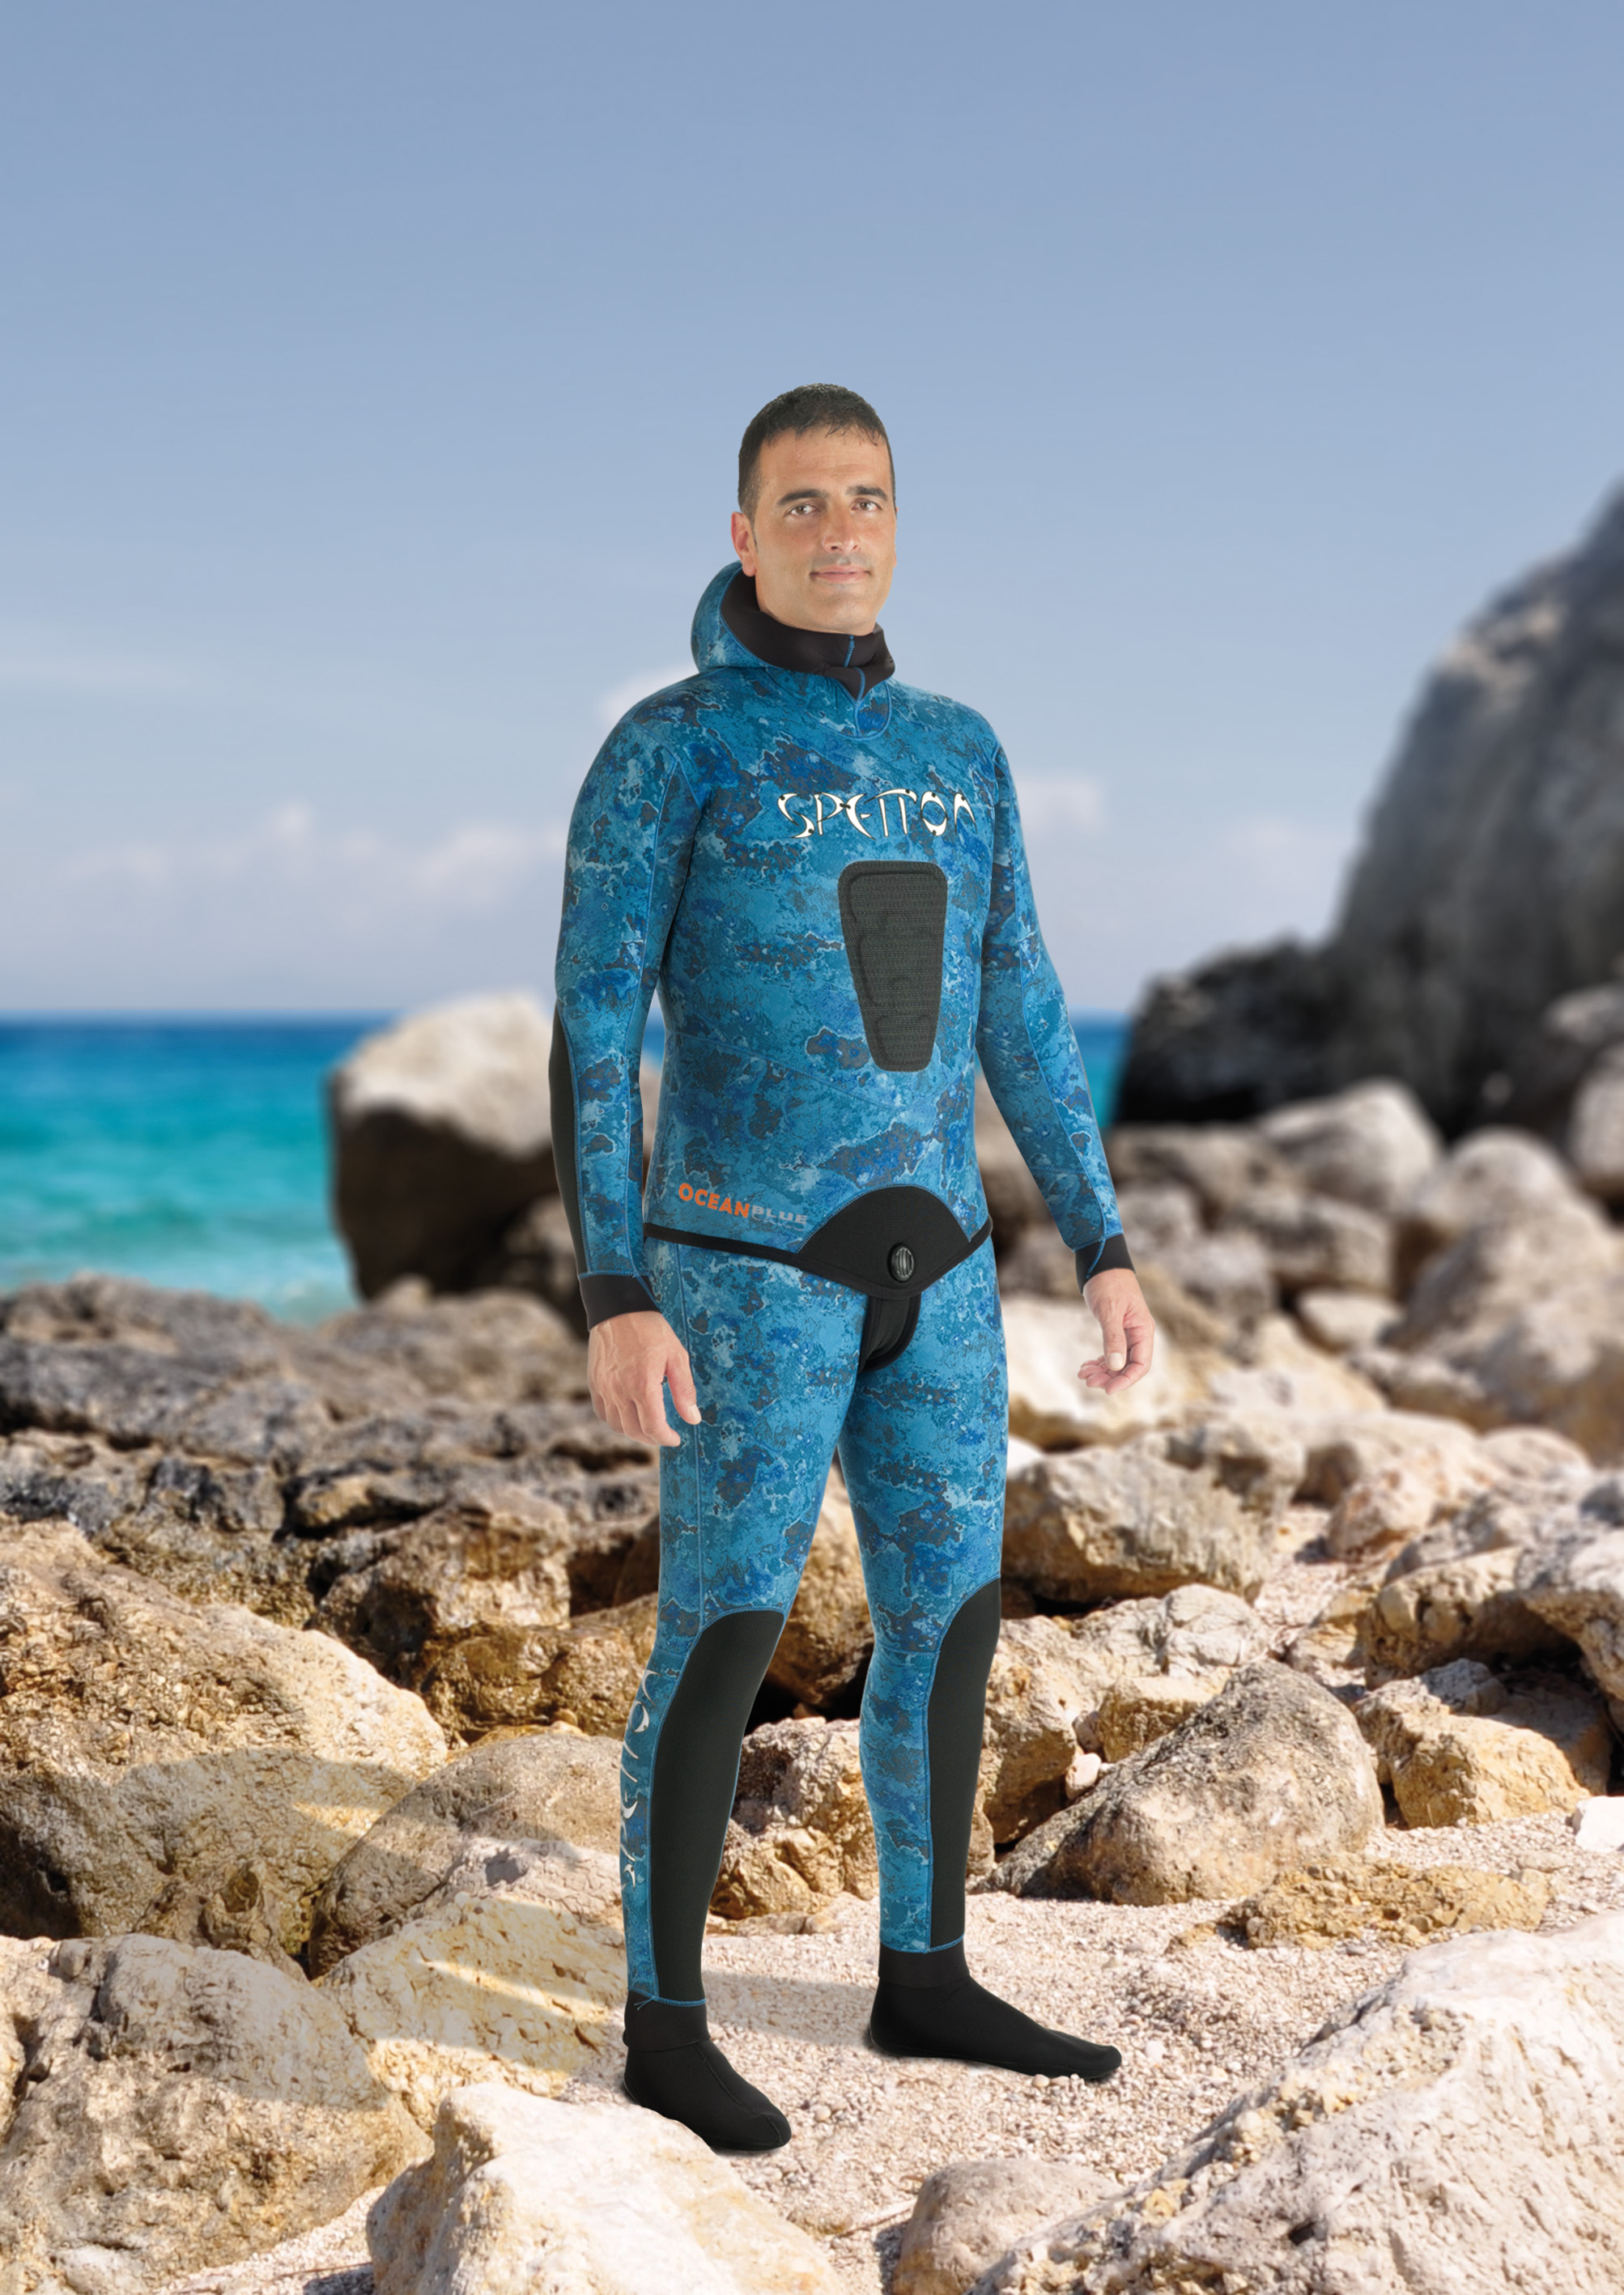 Spetton Usa - Spearfishing Gear, Equipment for the spearfishing